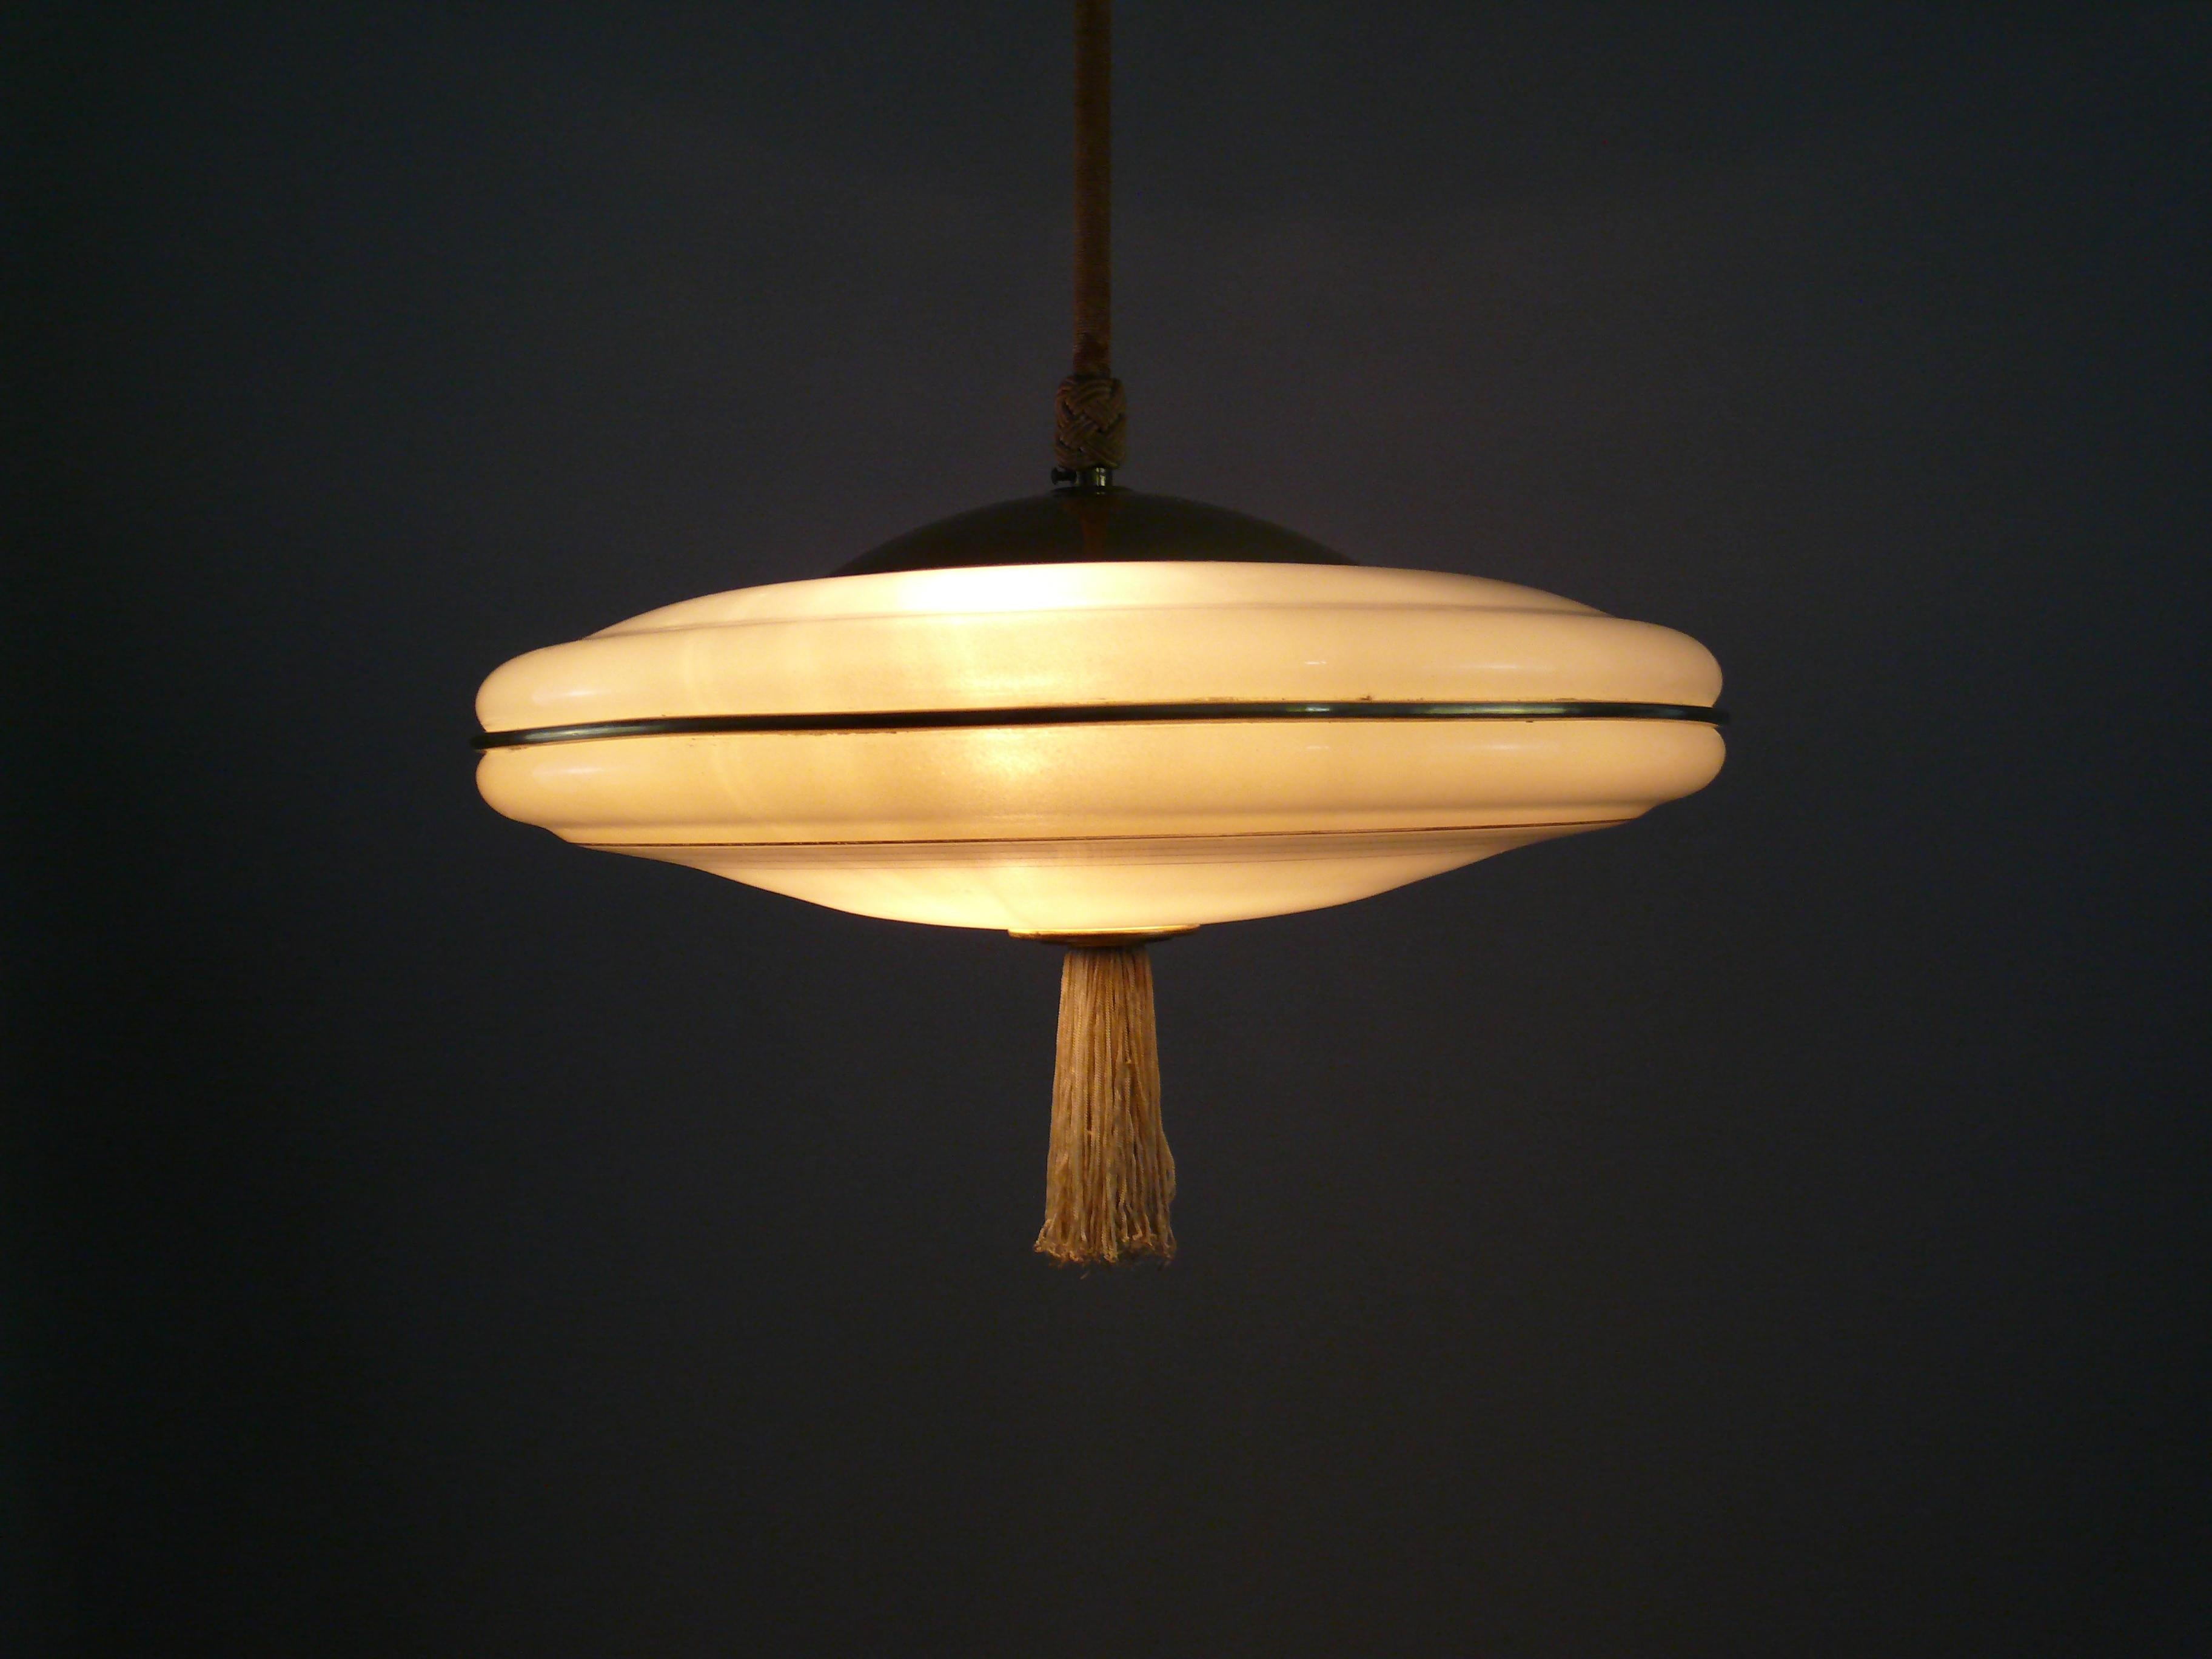 Rare Art Deco rod pendant lamp with decorated, ivory-colored glass shade from the 1930s. The glass shade is in very good condition, as are the radial gold stripes. On the outer edge there is even a real brass profile that is inserted into the glass